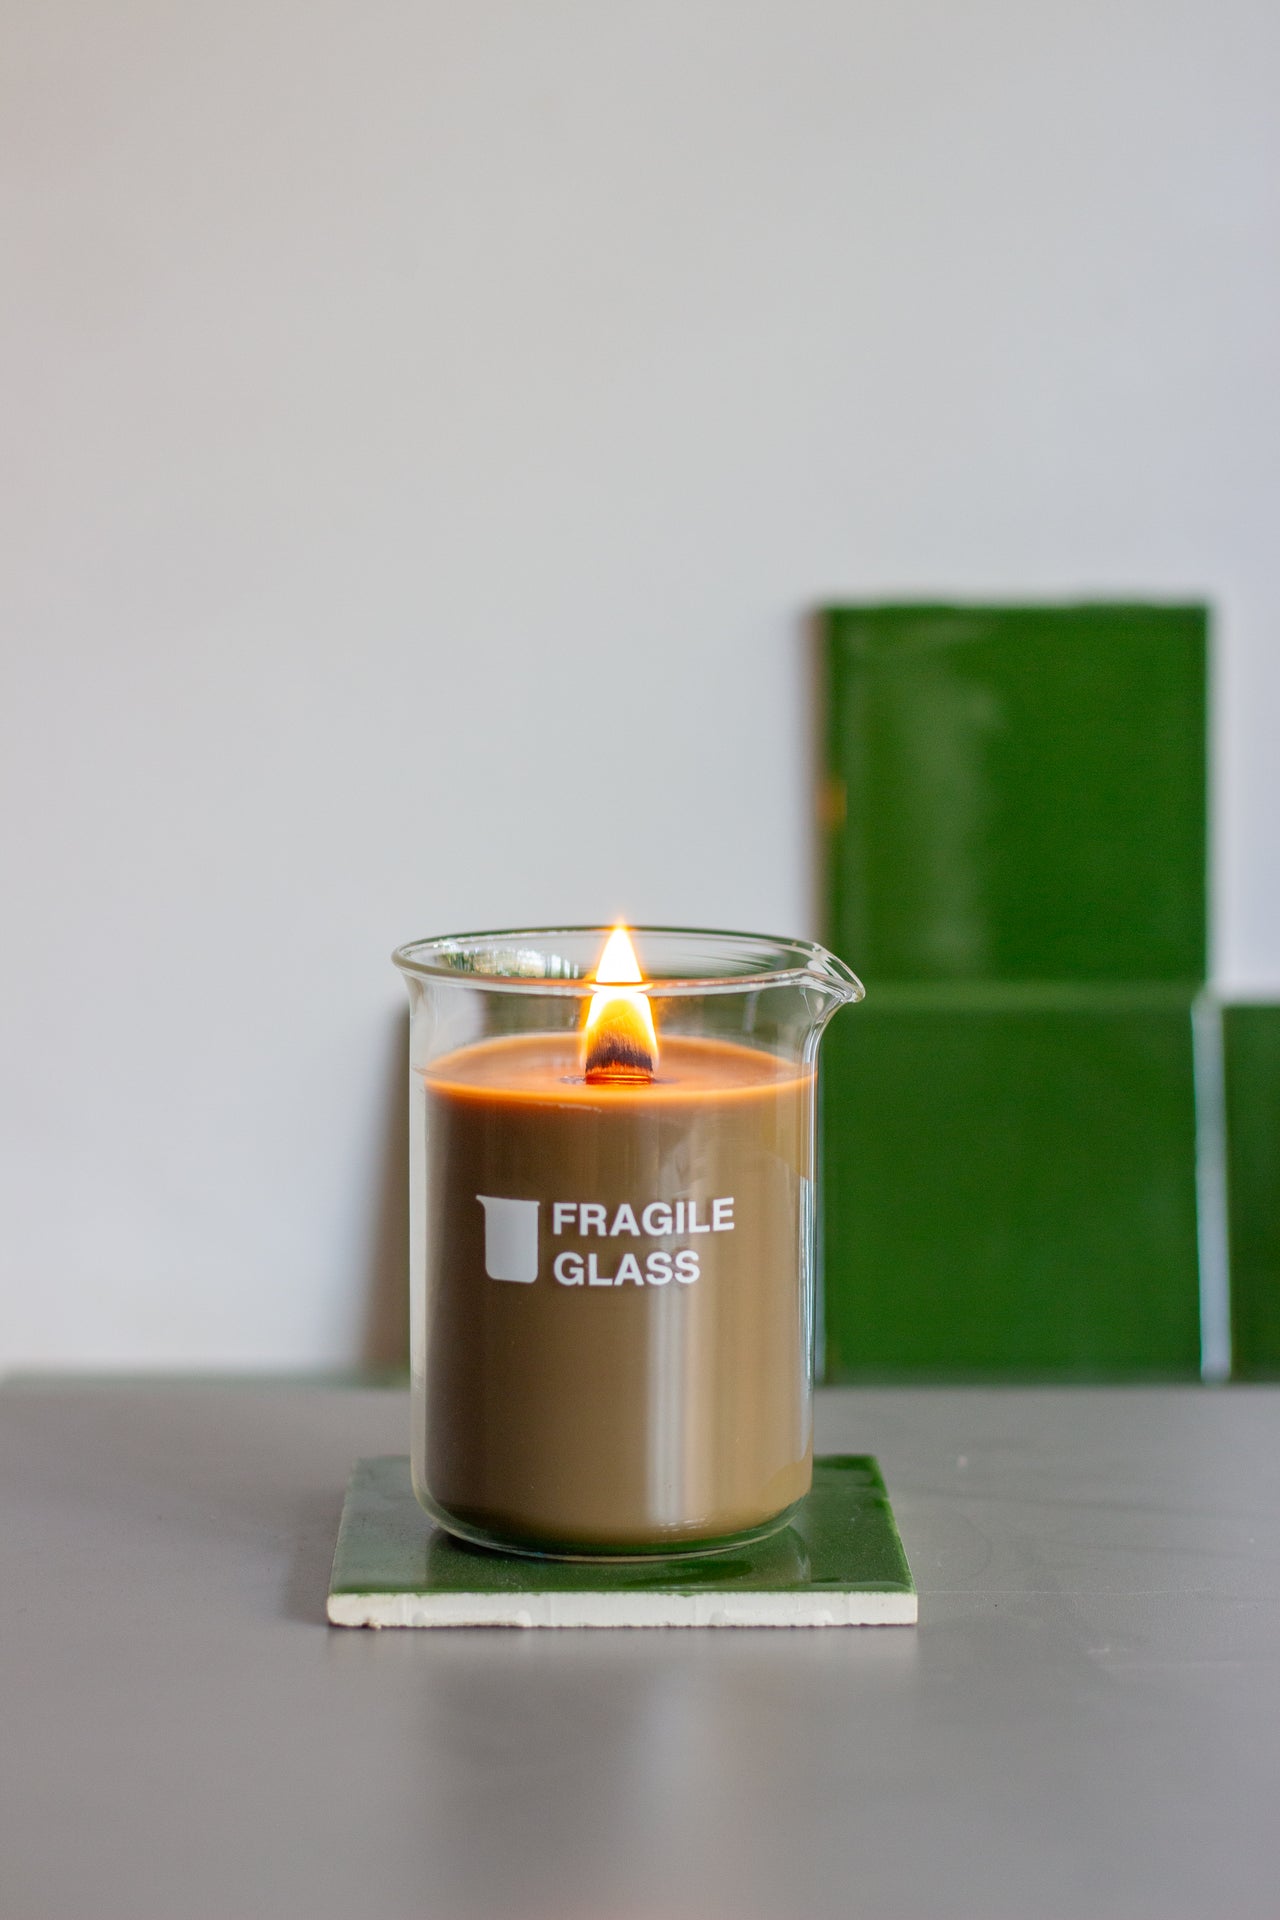 FRAGILE GLASS 'WOODWARD' CANDLE